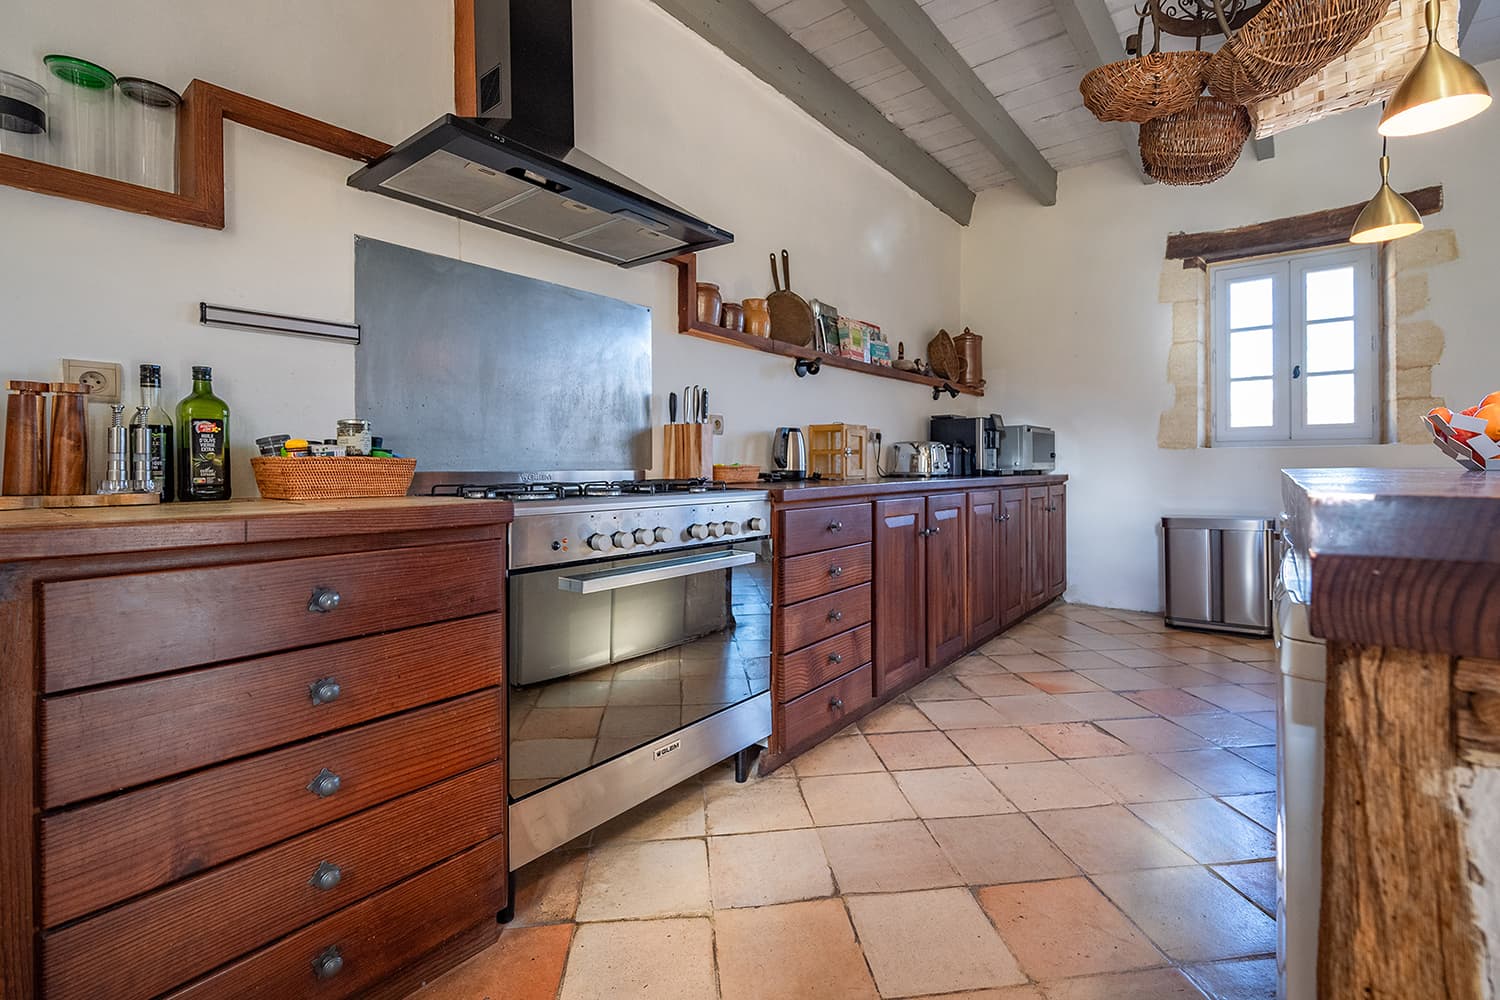 Kitchen | Holiday home in the Dordogne